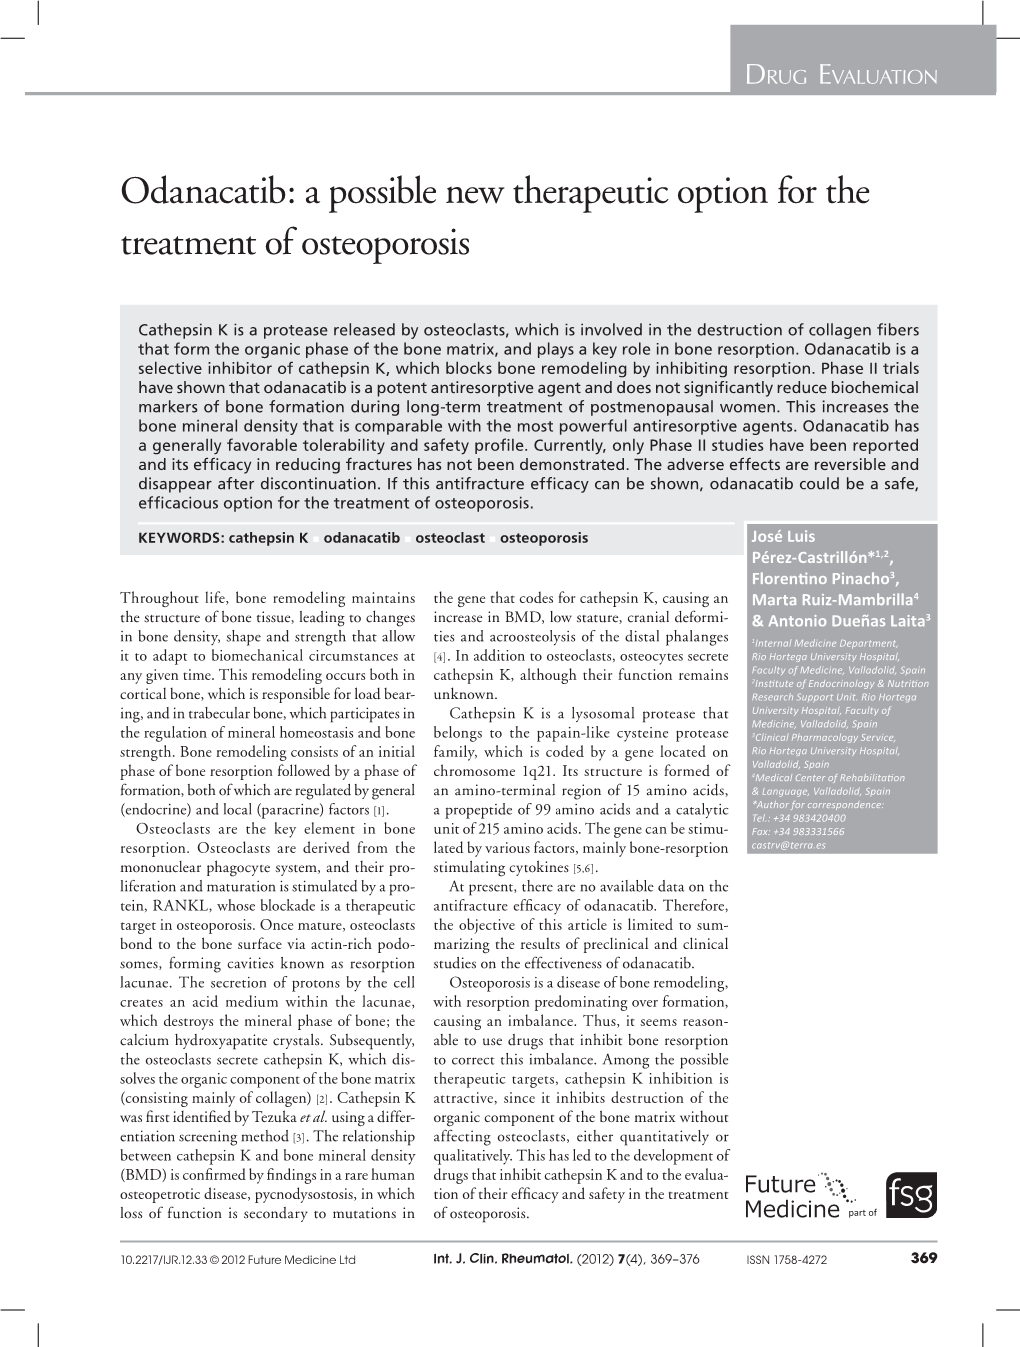 Odanacatib: a Possible New Therapeutic Option for the Treatment of Osteoporosis